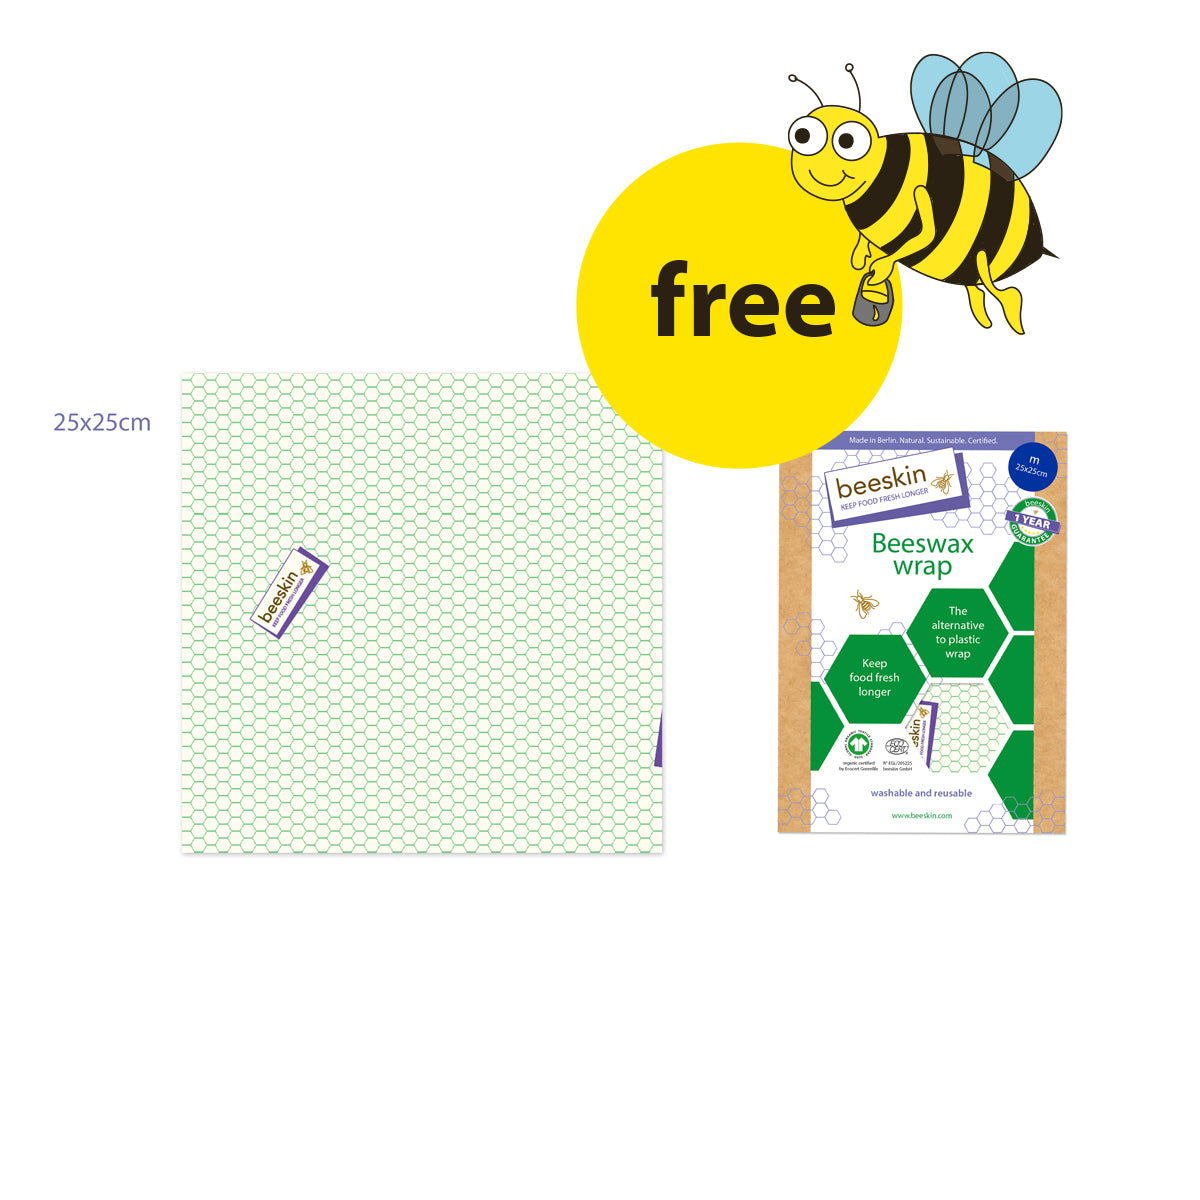 beeskin beeswax wrap standard honeycomb design and a big yellow button free with a funny bee next to packaging